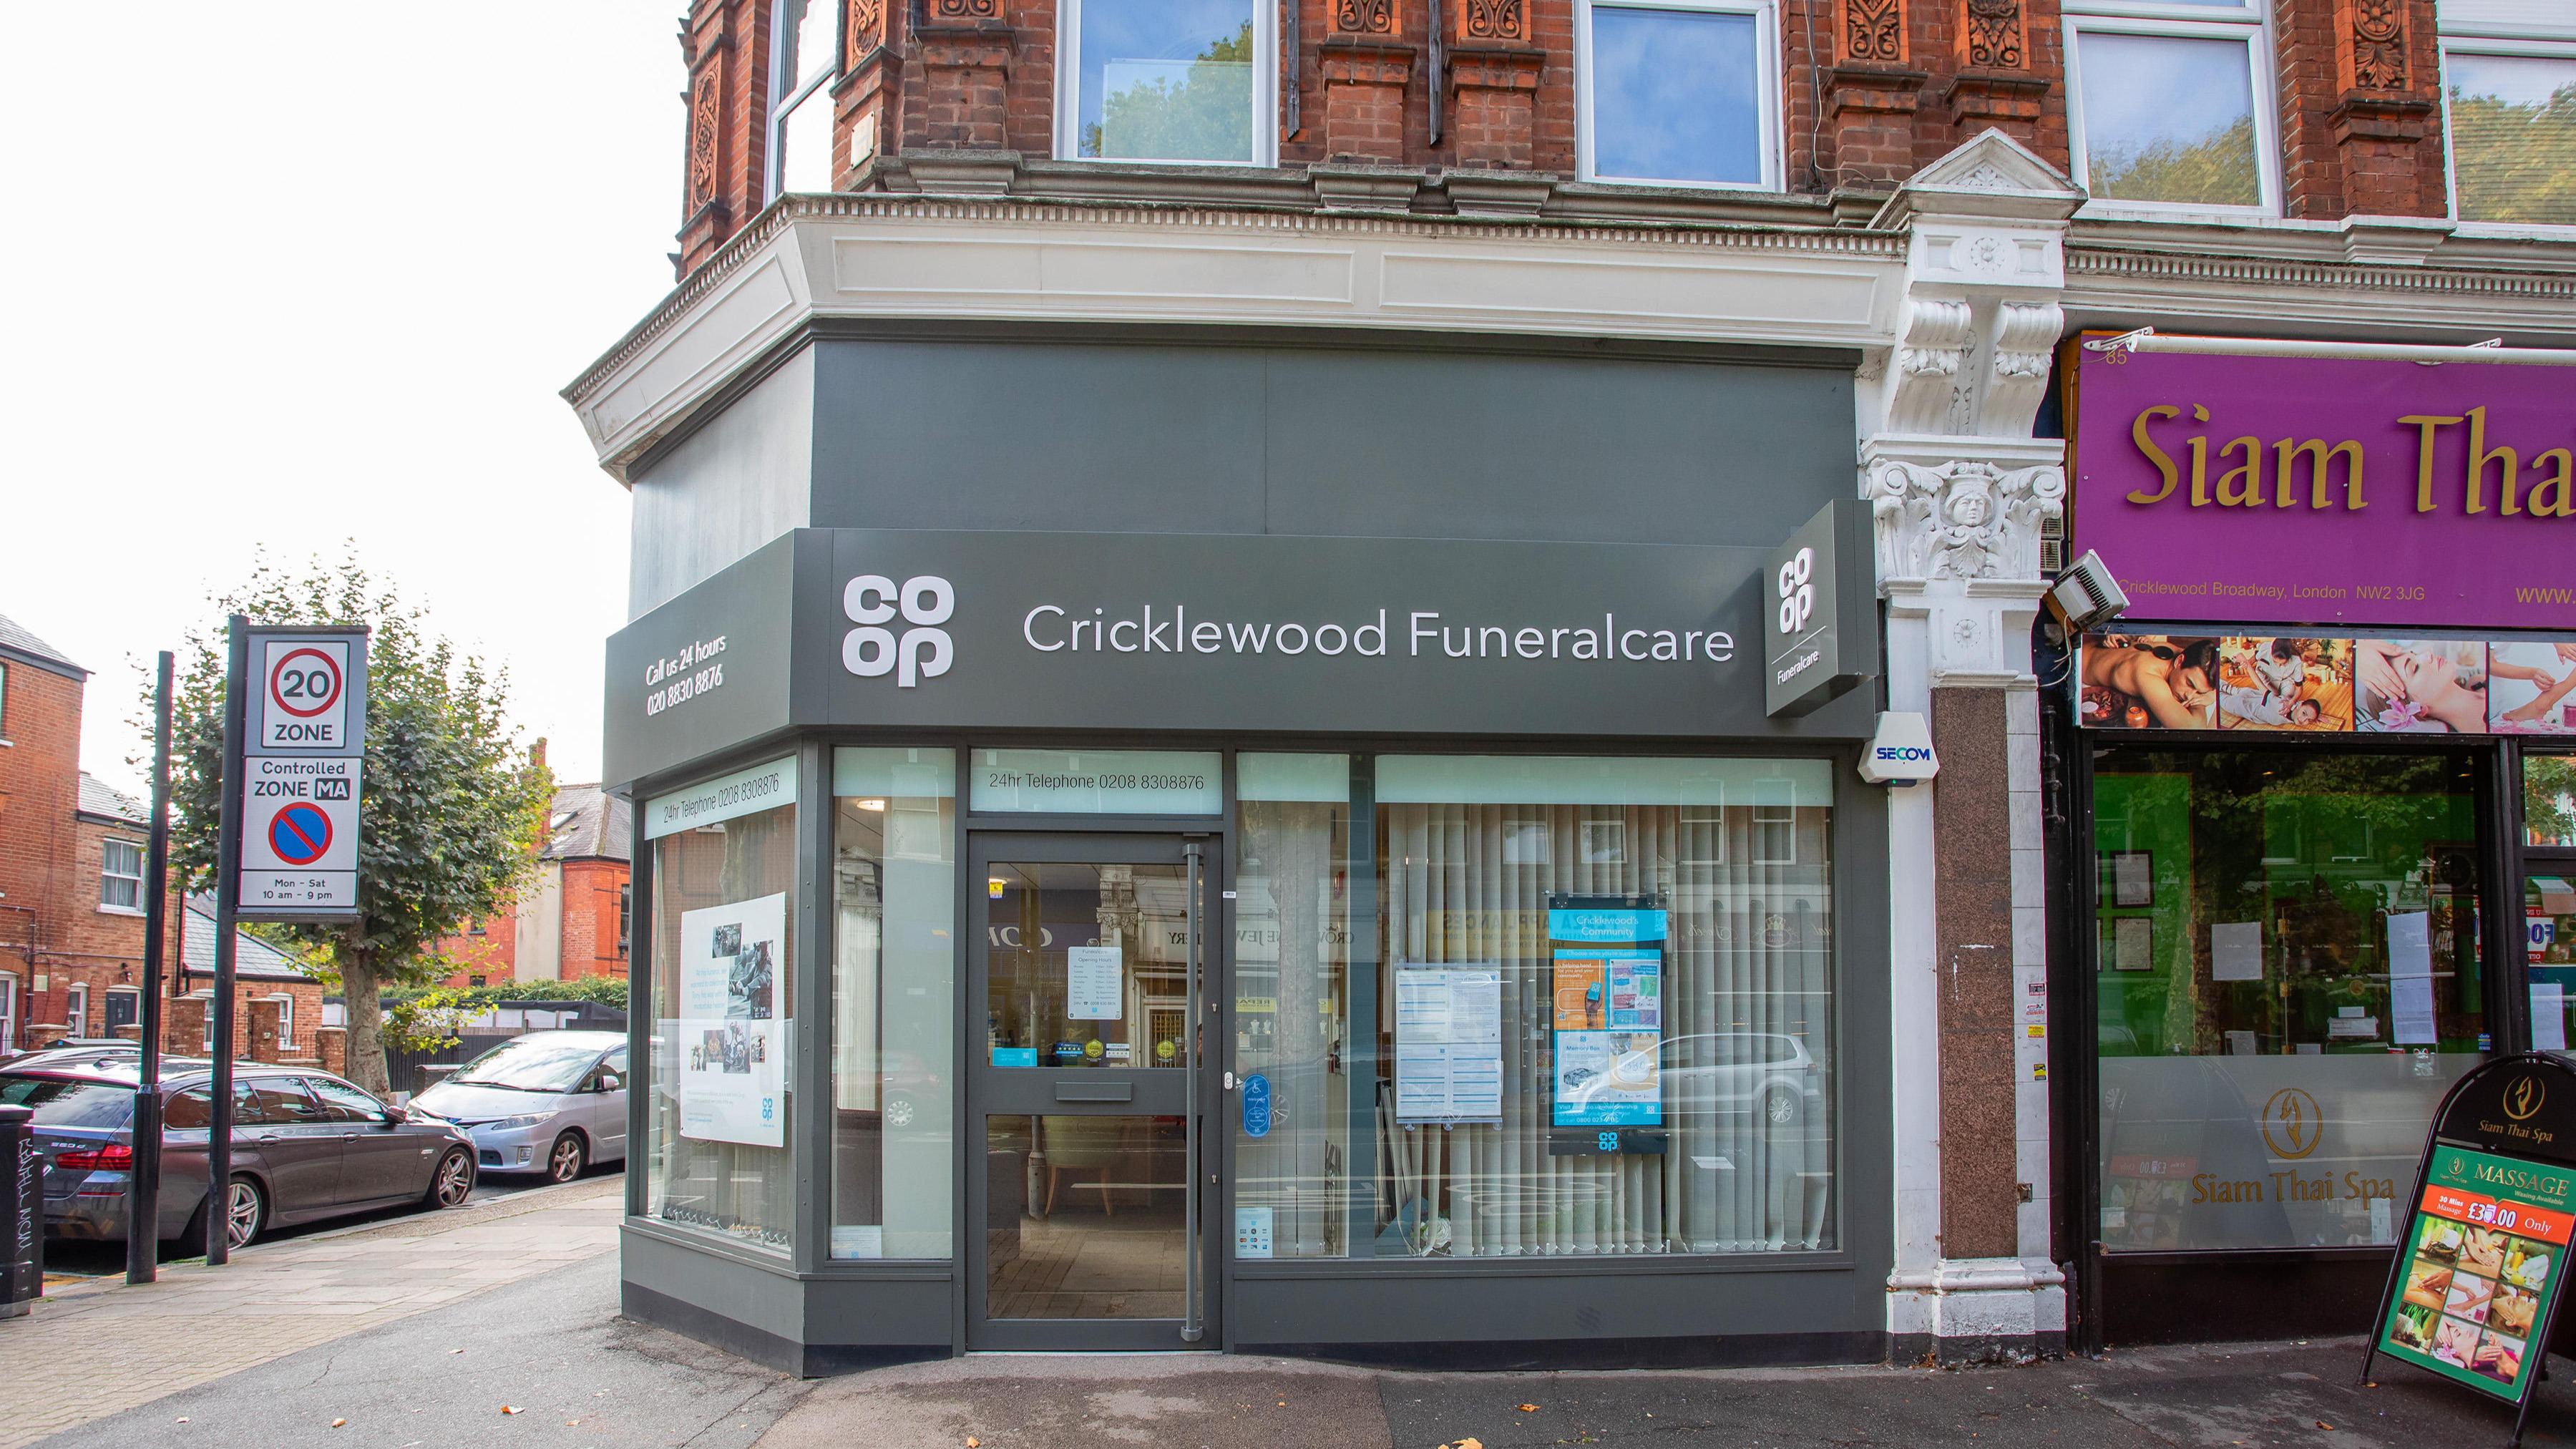 Images Cricklewood Funeralcare